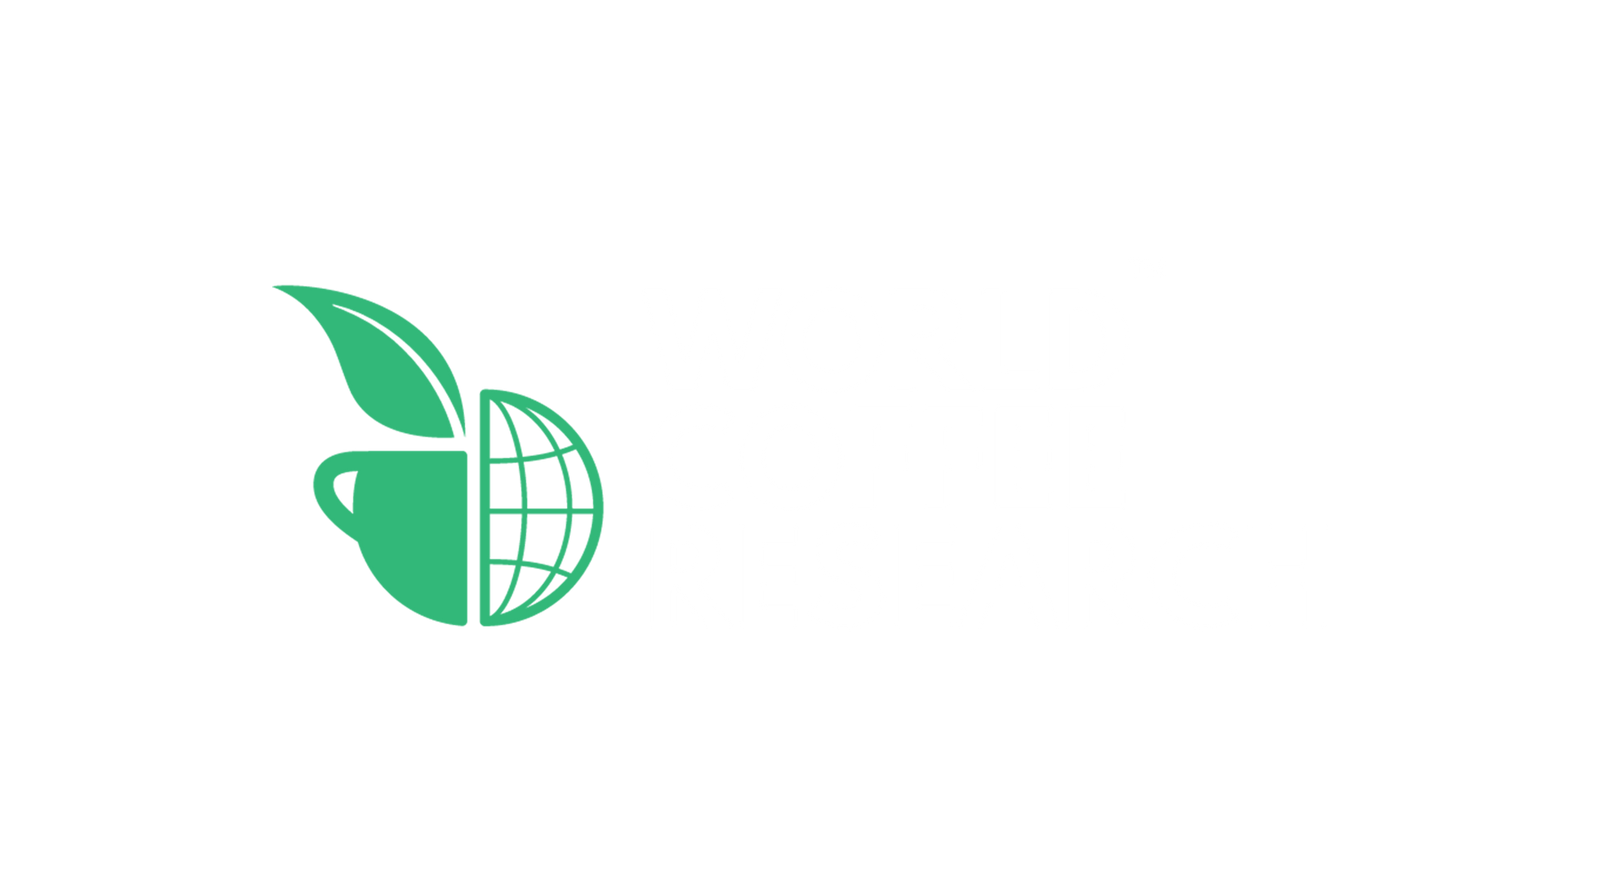 Why do we support World Coffee Research?